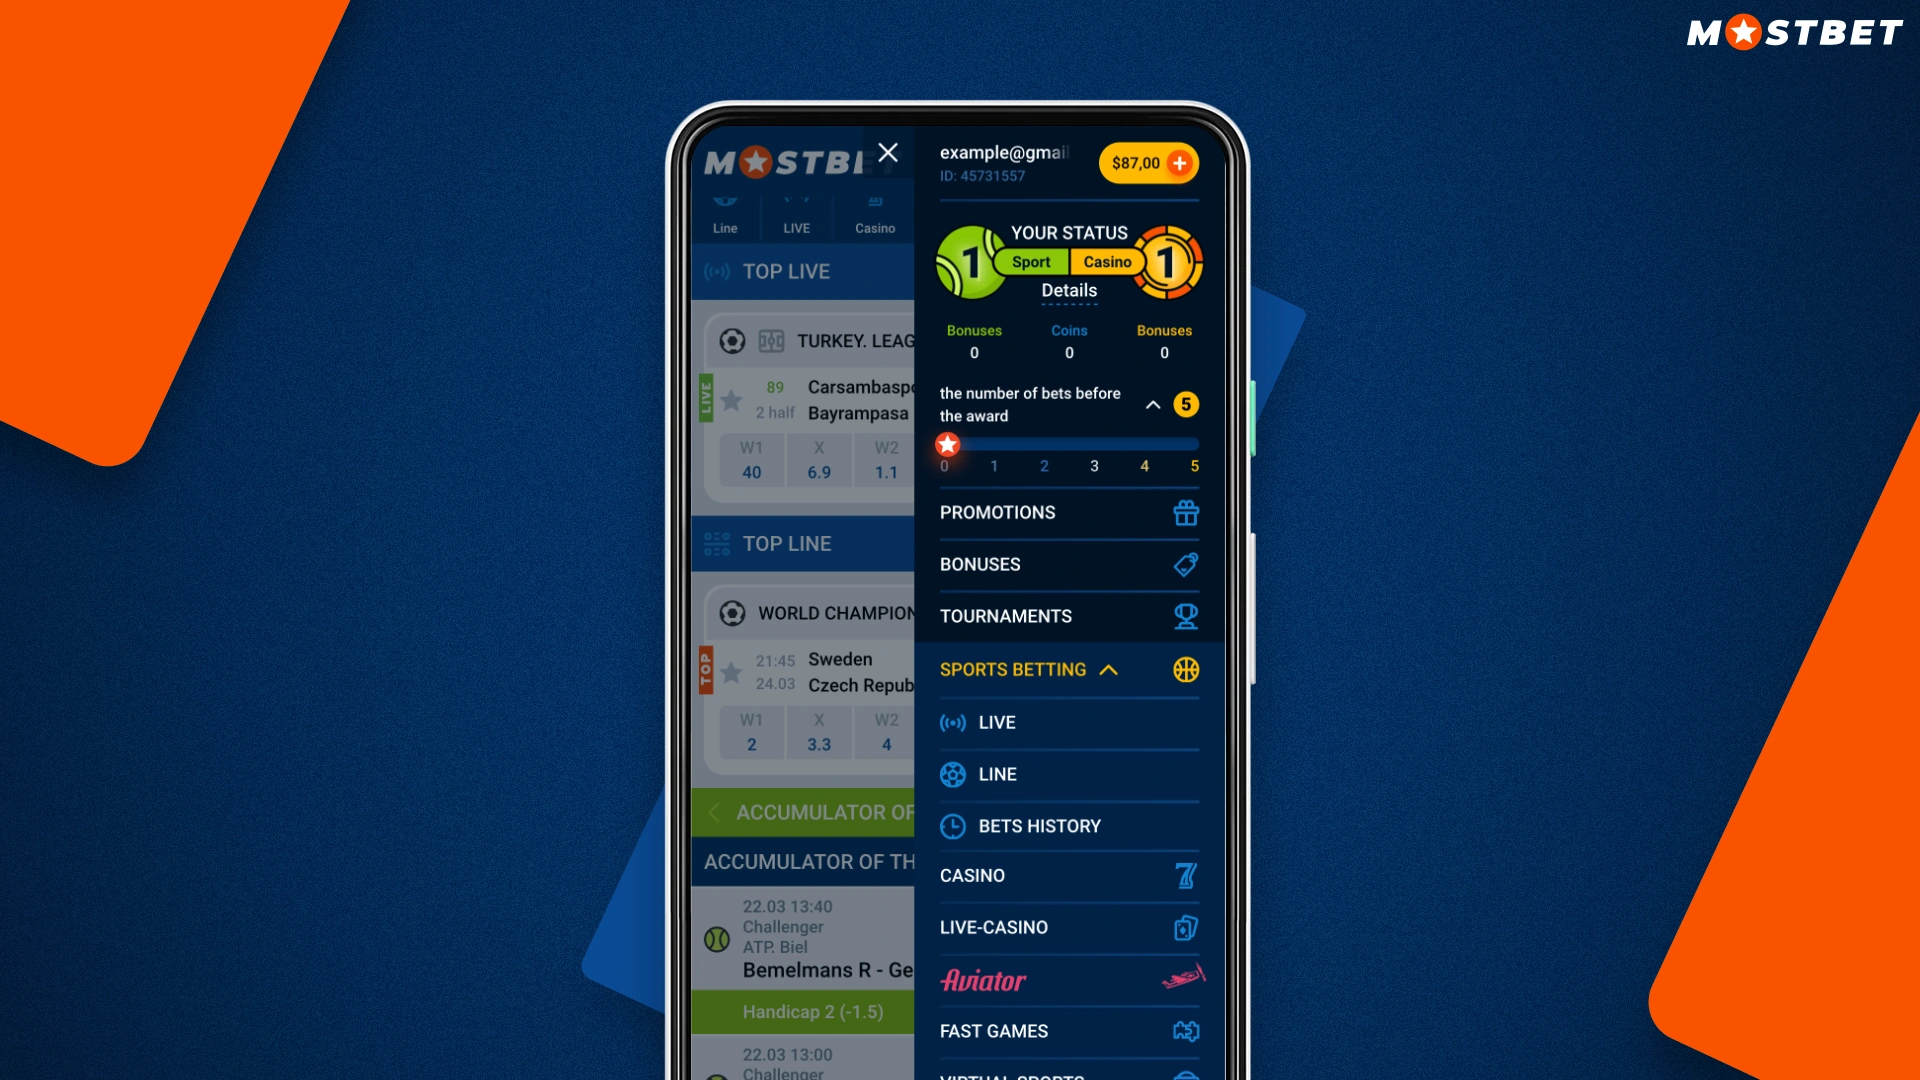 Step-by-step instructions on how to download mostbet on android